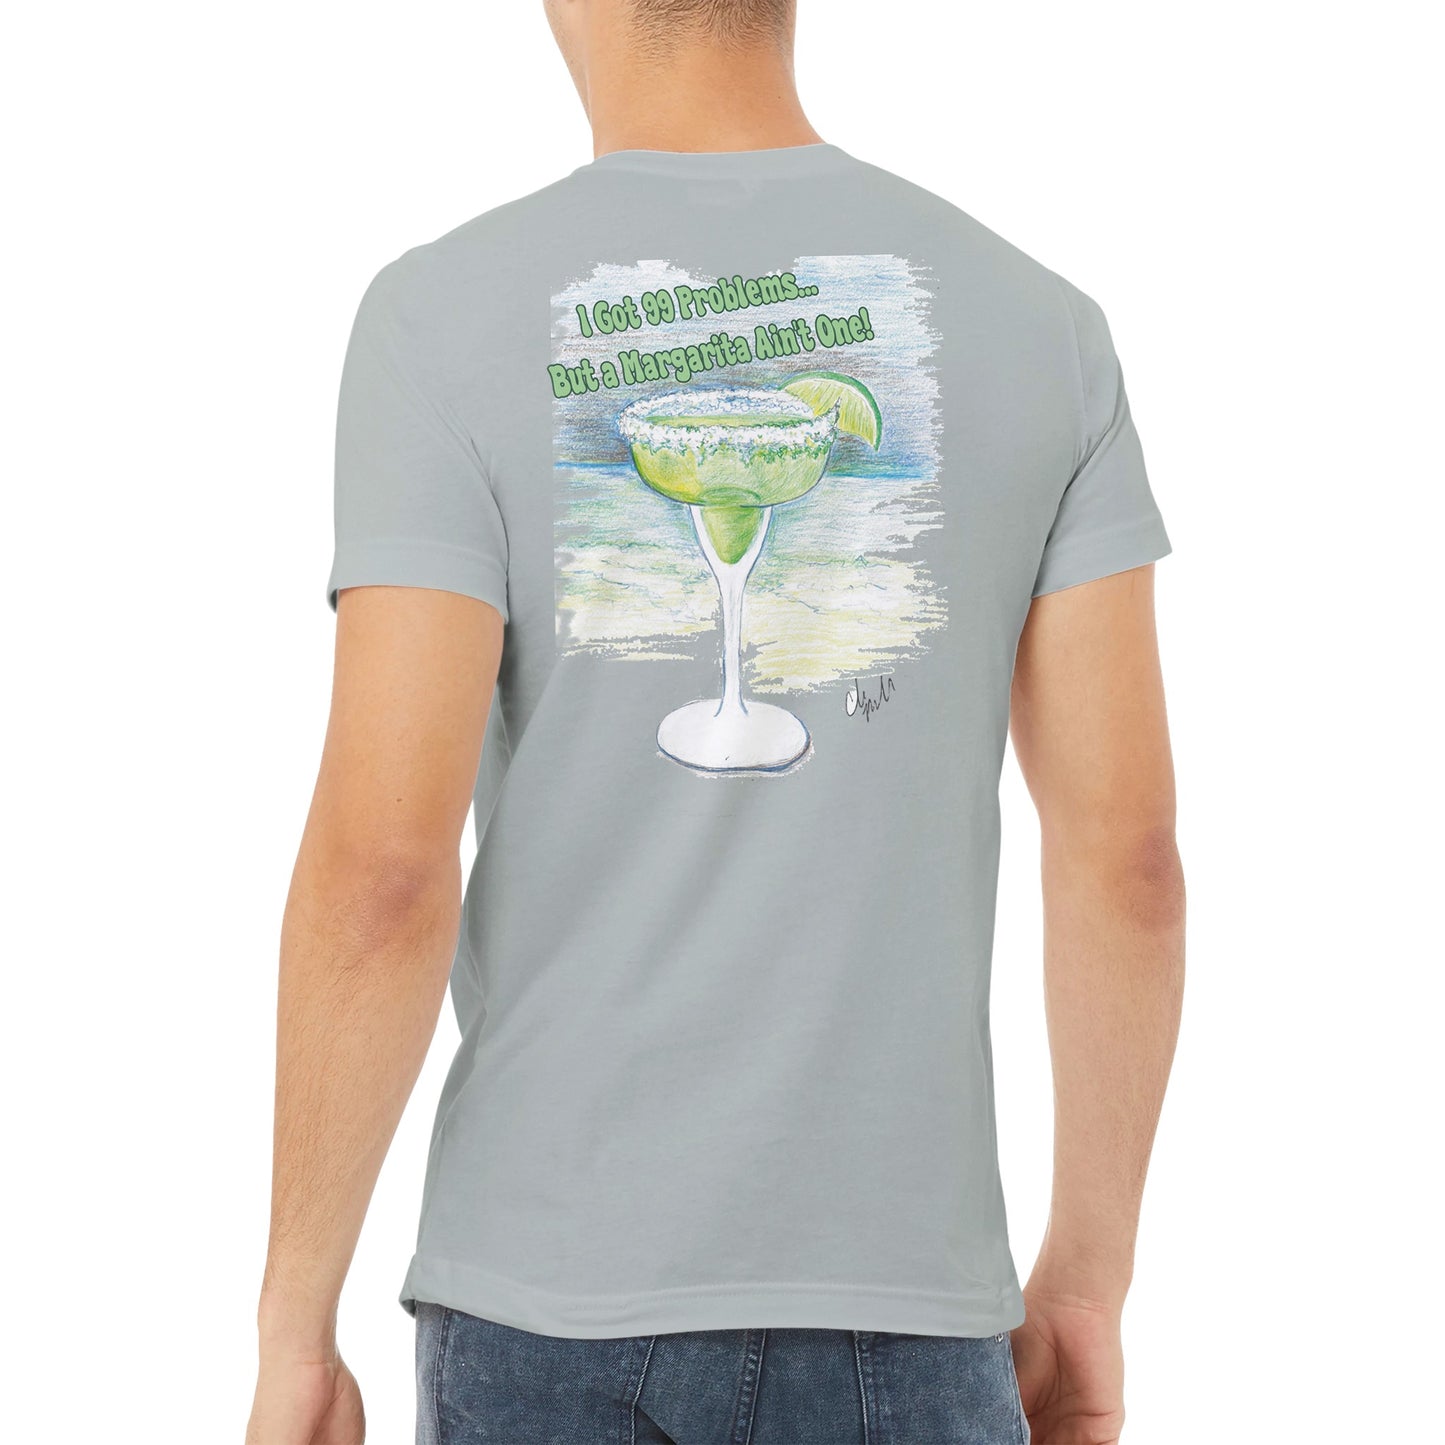 A ash premium unisex v-neck t-shirt with original artwork and motto I Got 99 Problems But a Margarita Aint One on back and WhatYa Say logo on front made with combed and ring-spun cotton from WhatYa Say Apparel worn by A brown-haired male back view.